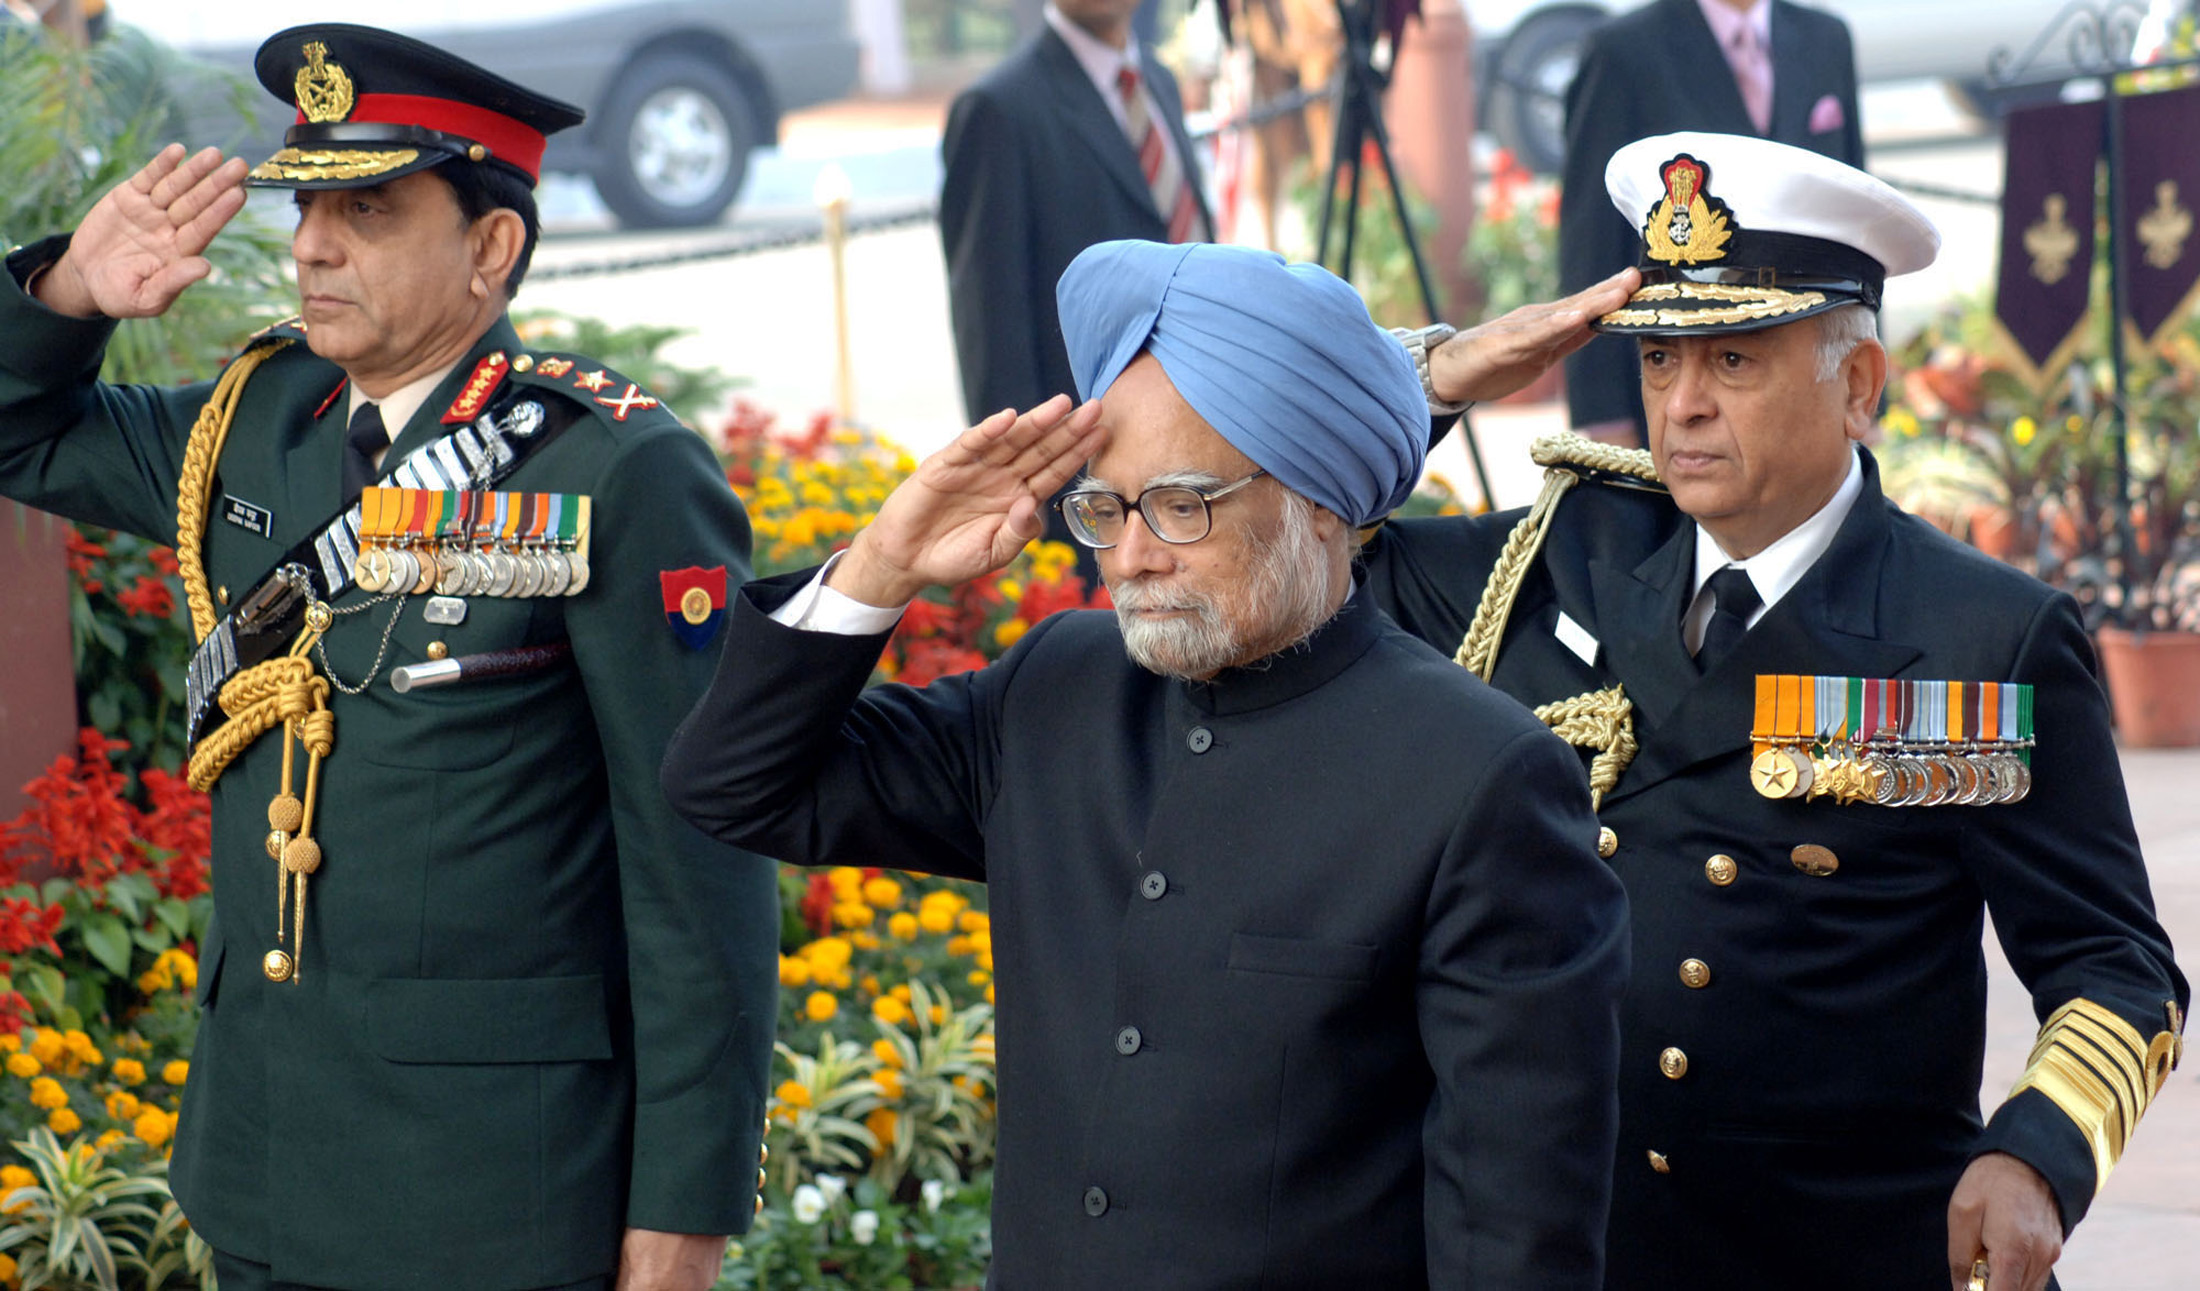 Mr. Singh Comes To Washington: India, China & The Pacific